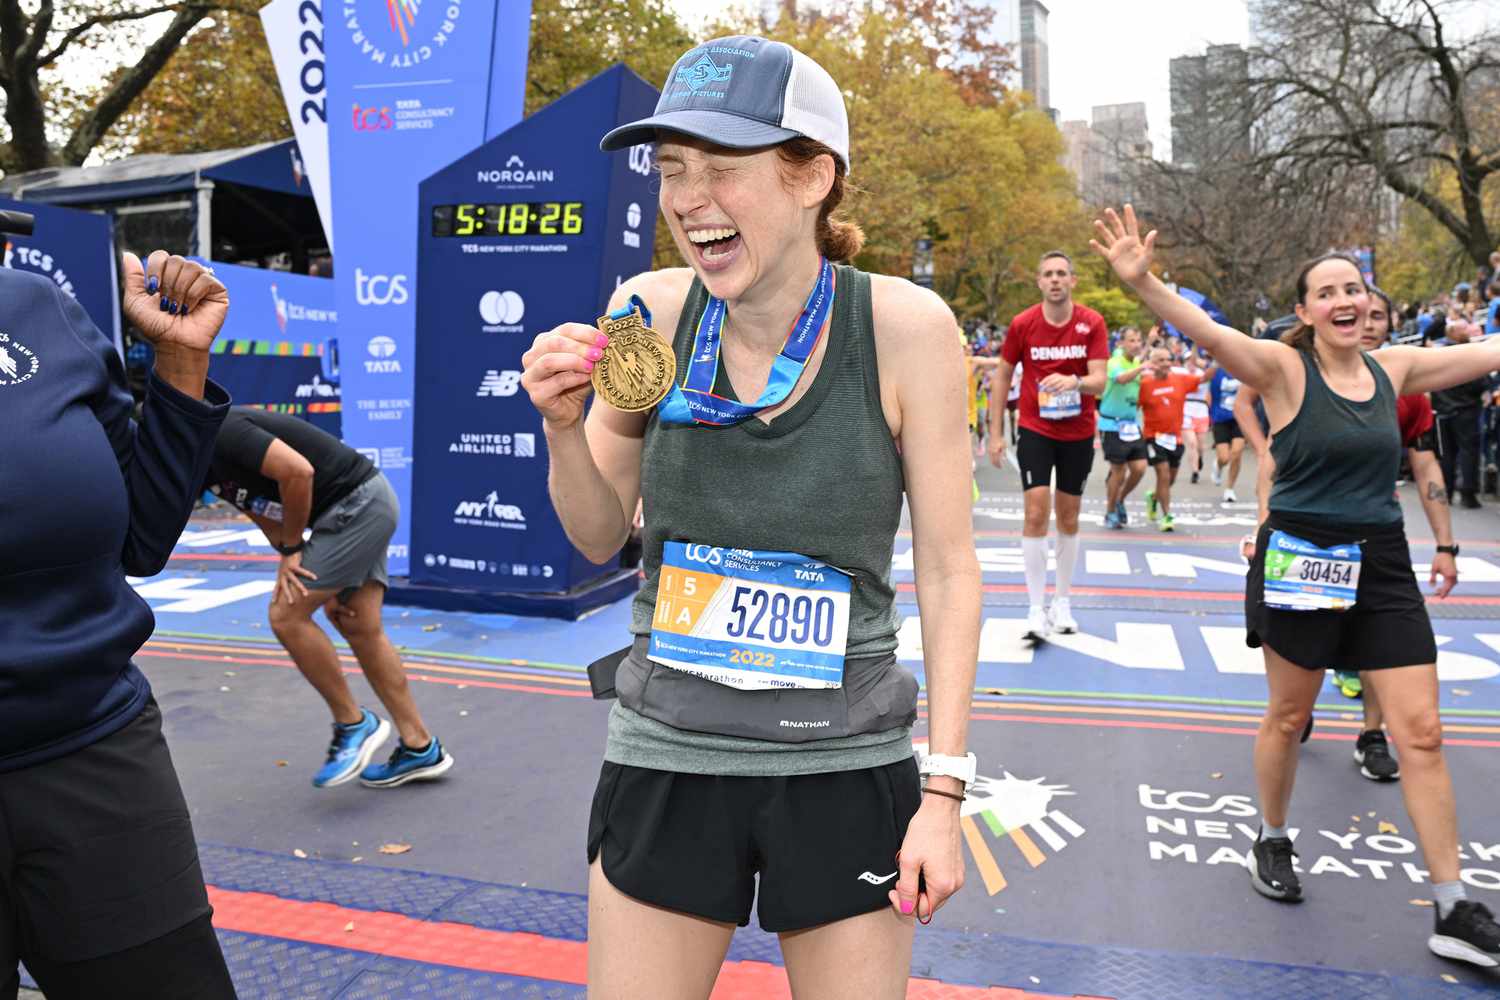 Amy Robach Marathon: A Love Story that Transcends the Finish Line! 13